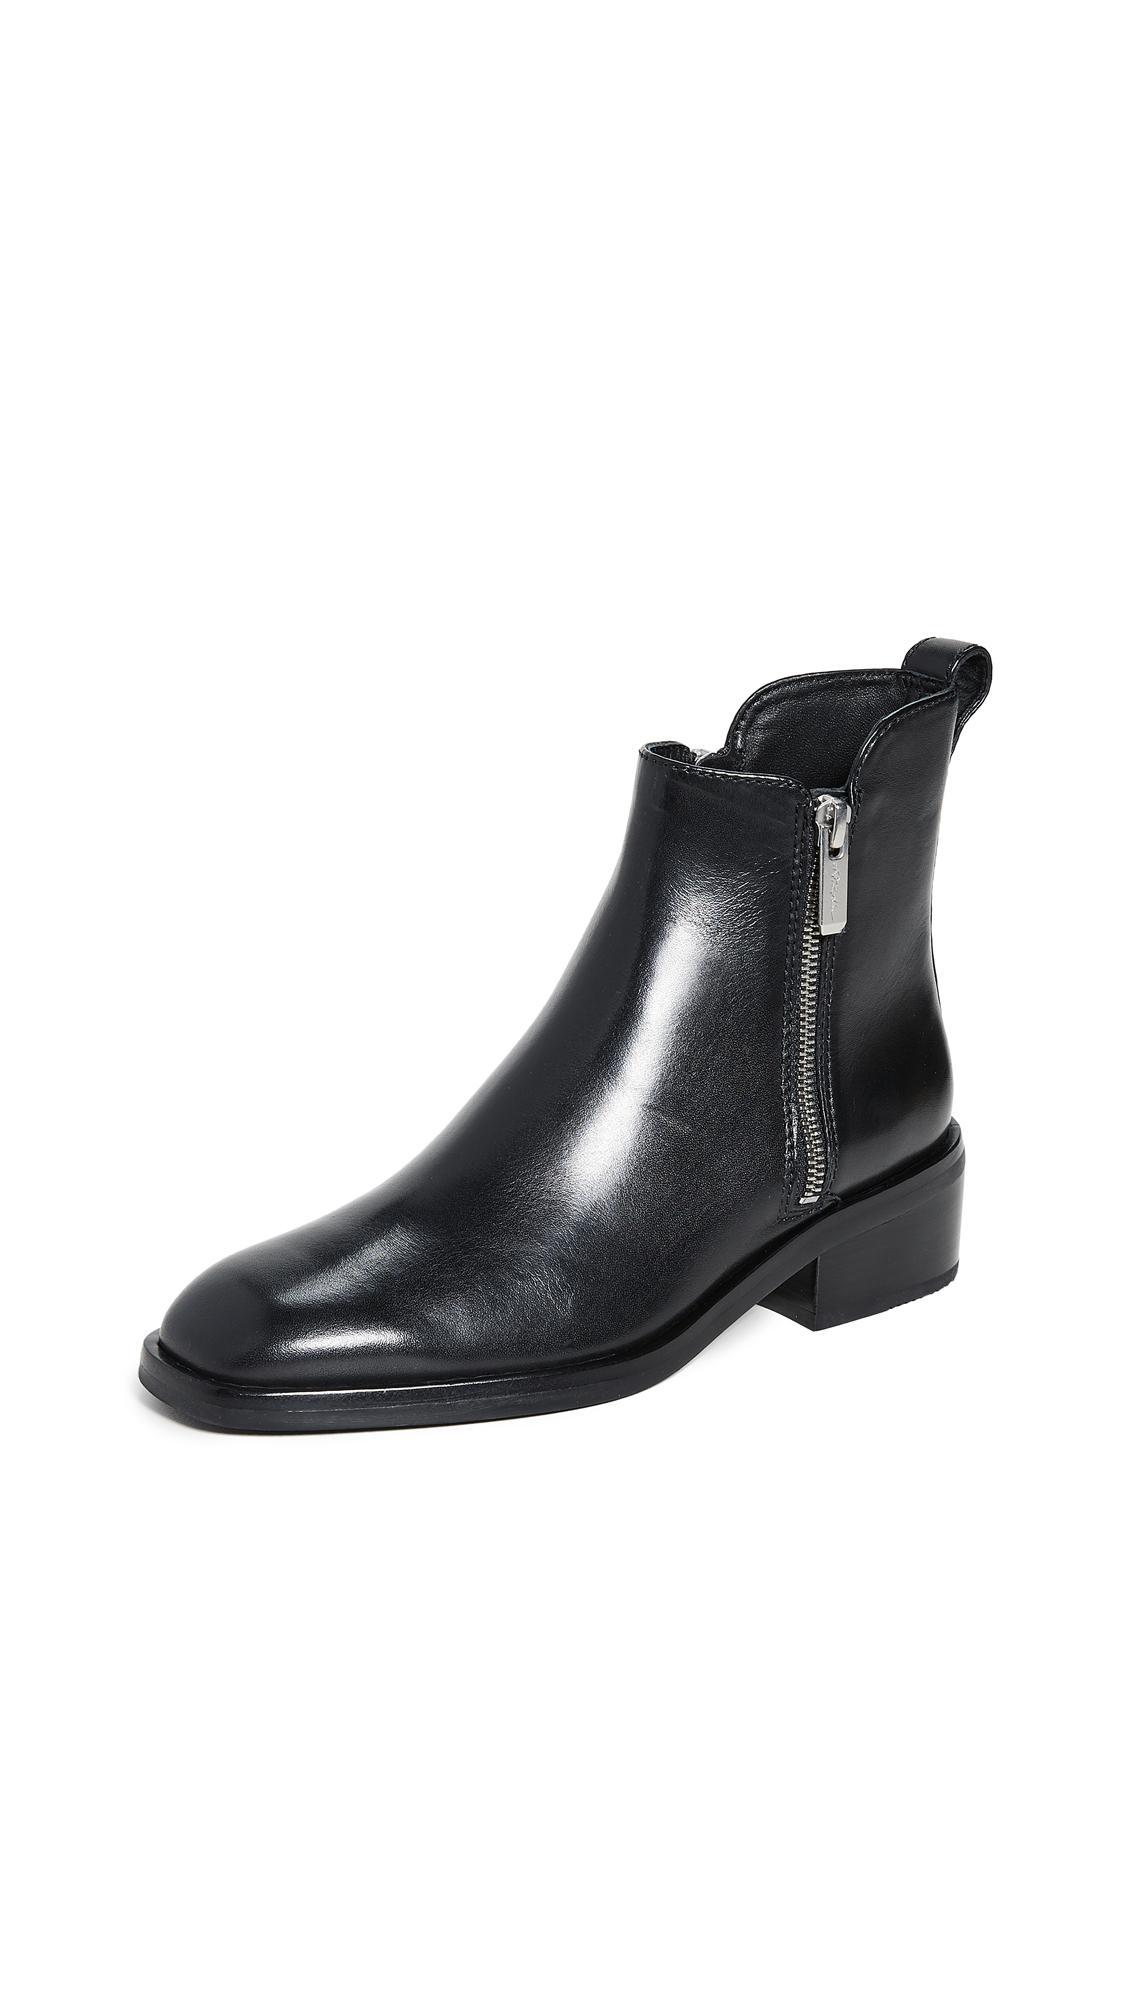 3.1 Phillip Lim Leather Alexa 40mm Boots in Black | Lyst